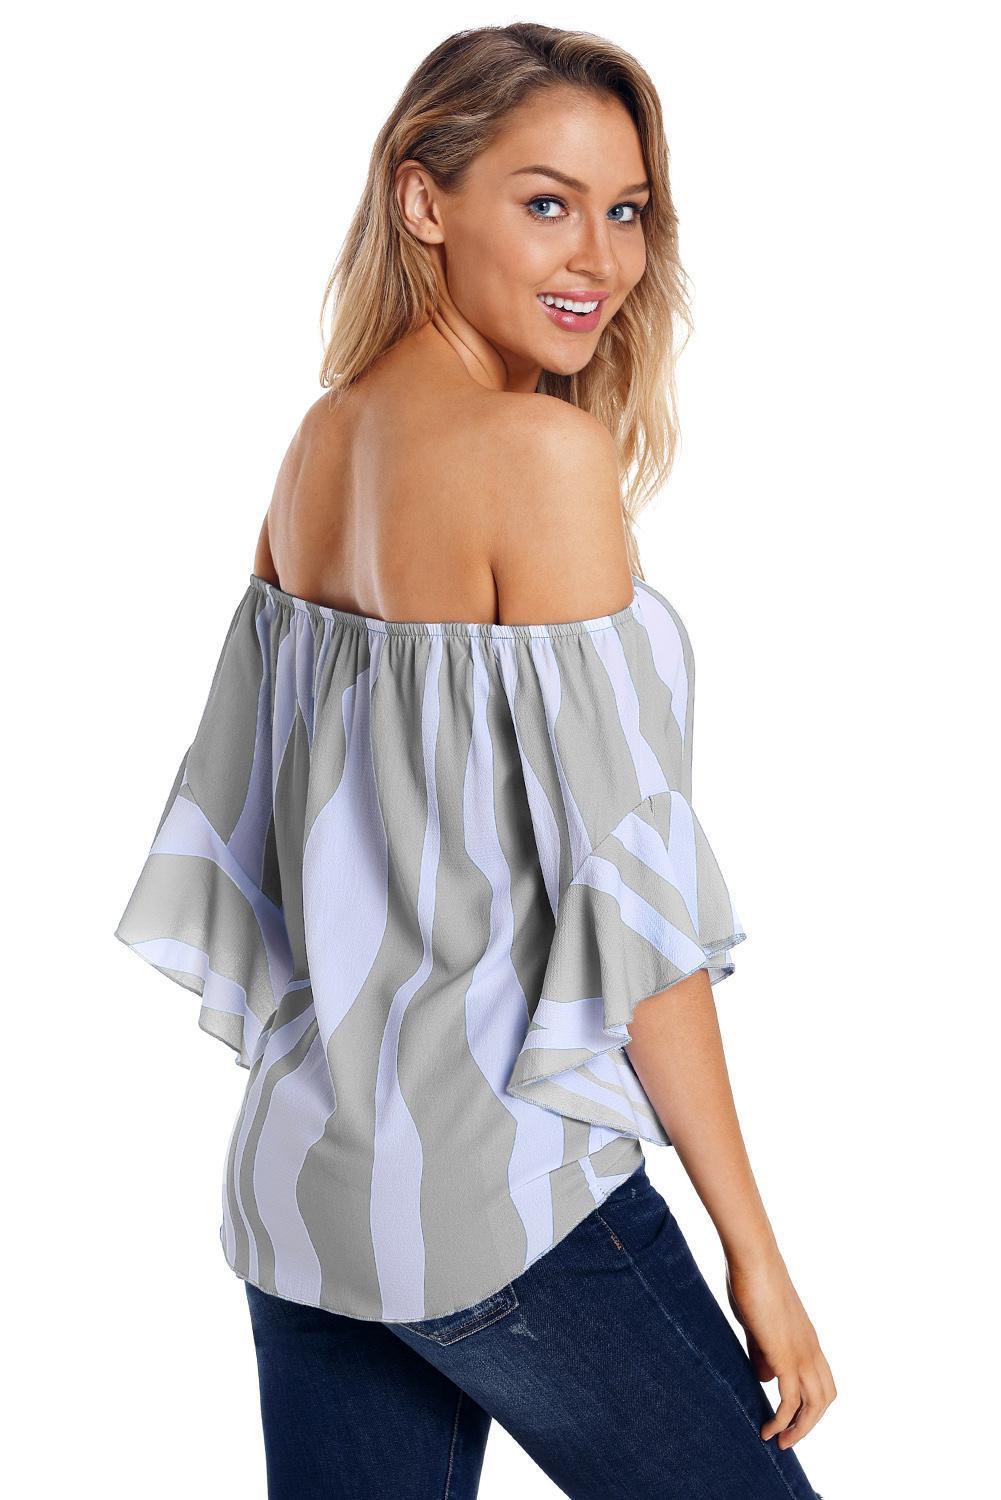 $ 19.99 - Asvivid Womens Striped Off the Shoulder Tops 3 4 Flare Sleeve ...